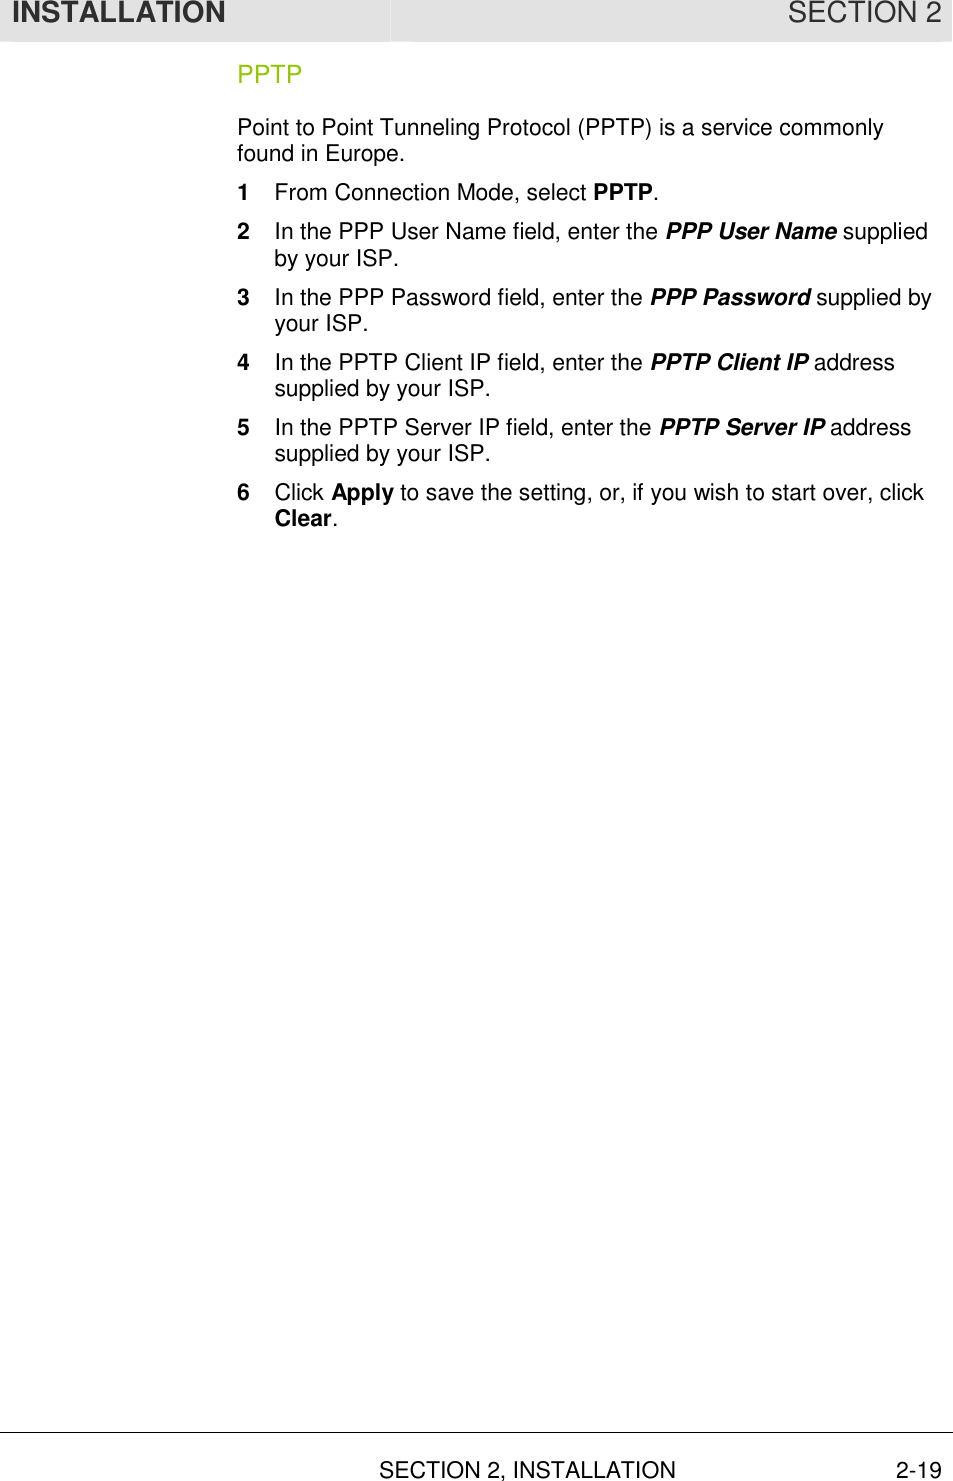 INSTALLATION SECTION 2  SECTION 2, INSTALLATION 2-19 PPTP Point to Point Tunneling Protocol (PPTP) is a service commonly found in Europe. 1  From Connection Mode, select PPTP.  2  In the PPP User Name field, enter the PPP User Name supplied by your ISP. 3  In the PPP Password field, enter the PPP Password supplied by your ISP. 4  In the PPTP Client IP field, enter the PPTP Client IP address supplied by your ISP. 5  In the PPTP Server IP field, enter the PPTP Server IP address supplied by your ISP. 6  Click Apply to save the setting, or, if you wish to start over, click Clear. 